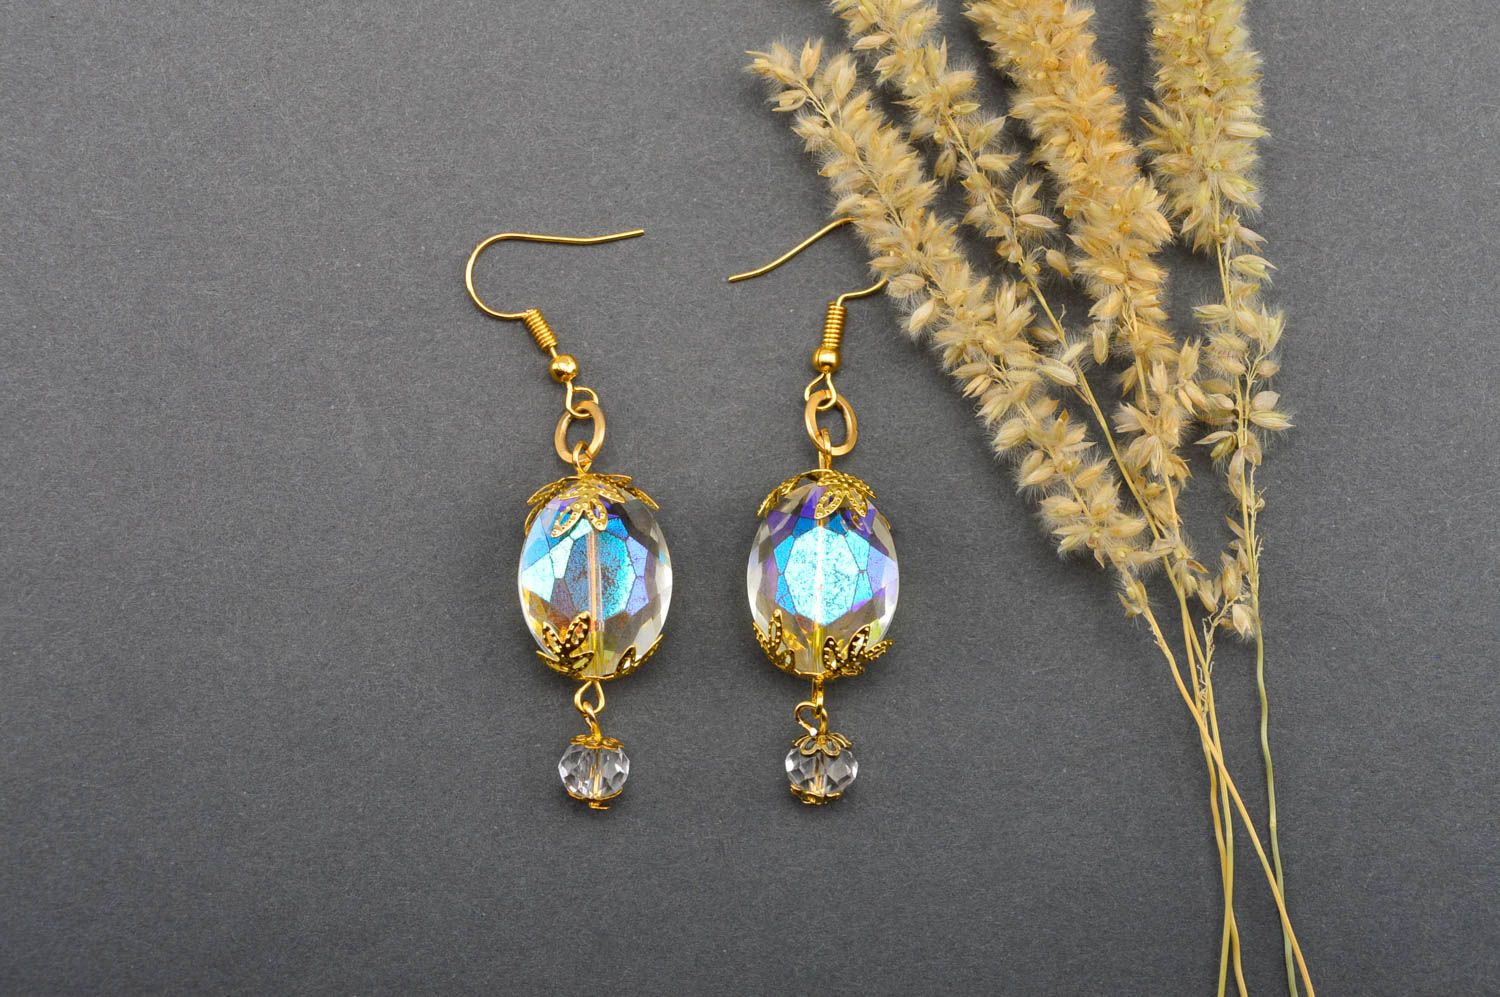 Unusual handmade beaded earrings costume jewelry designs gifts for her photo 1